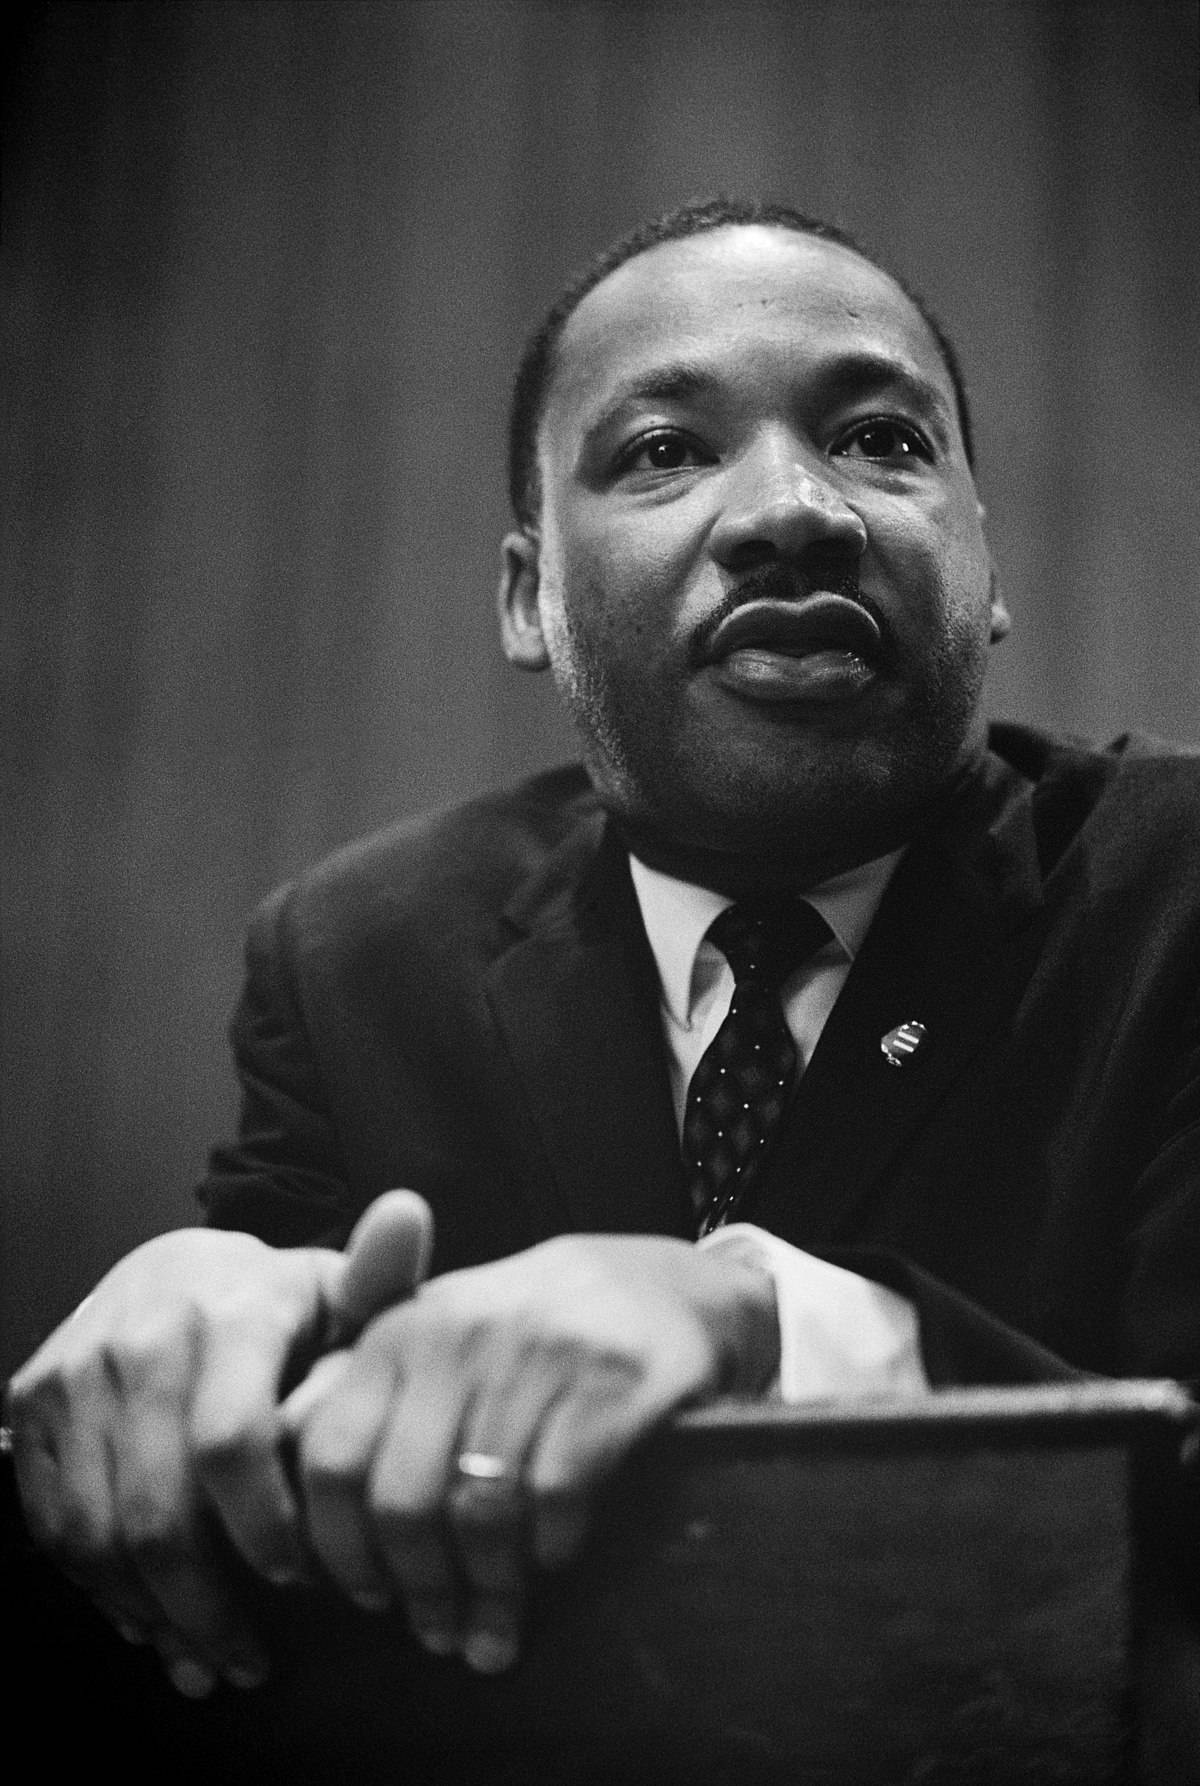 Martin Luther King Jr. Speaking Passionately At A Public Event Background